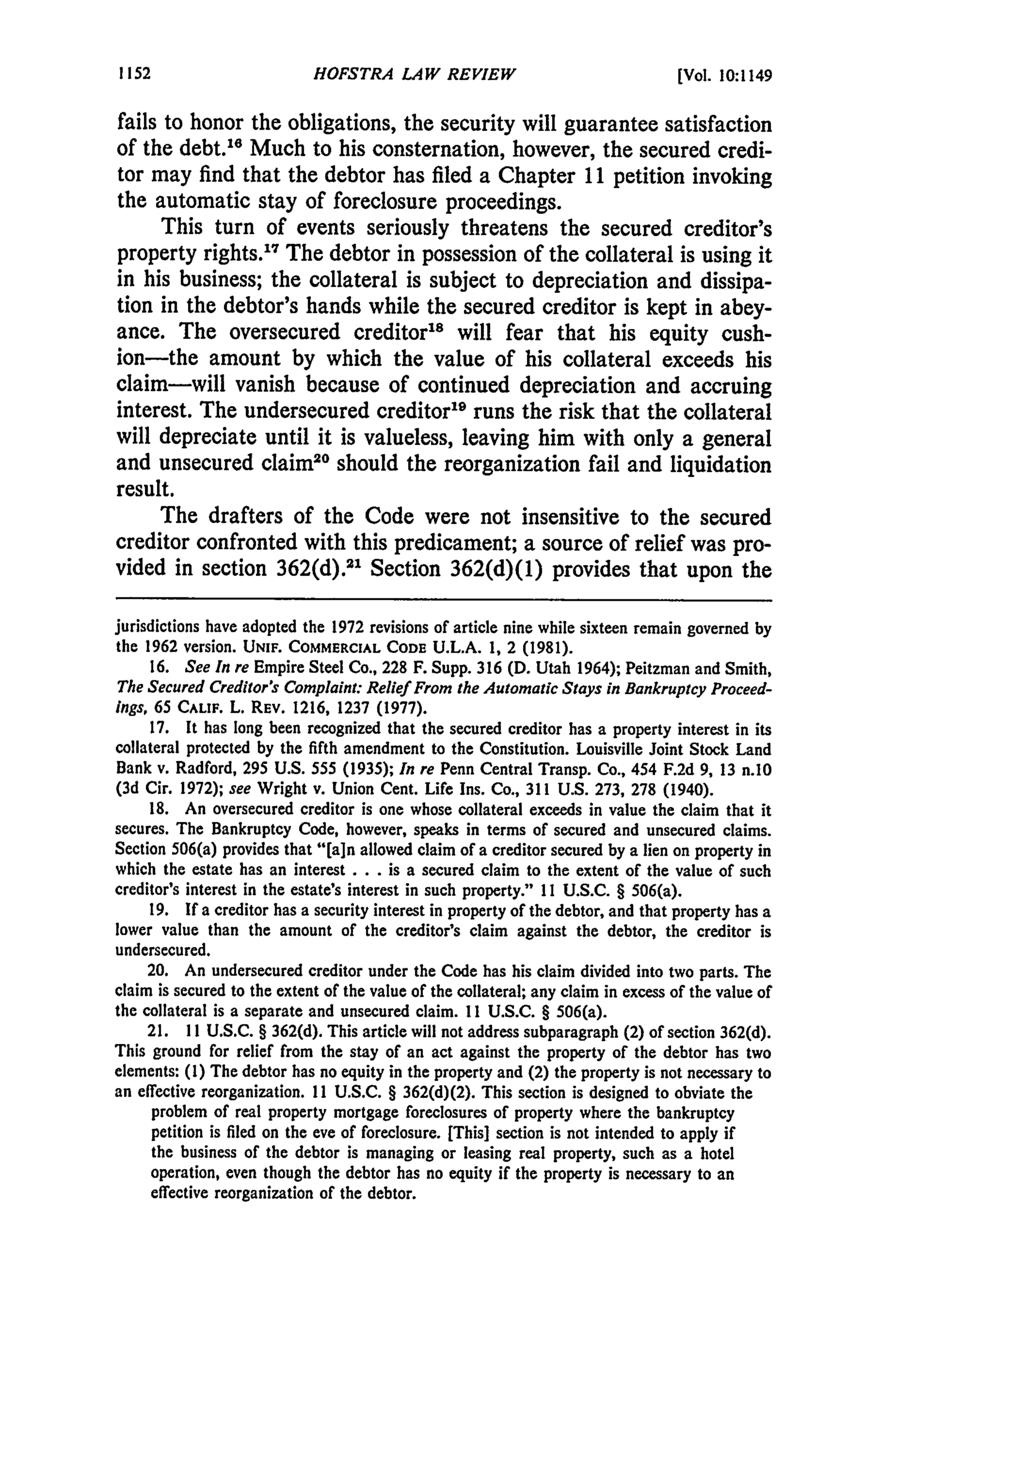 Hofstra Law Review, Vol. 10, Iss. 4 [1982], Art. 8 HOFSTRA LAW REVIEW [Vol. 10:1149 fails to honor the obligations, the security will guarantee satisfaction of the debt.